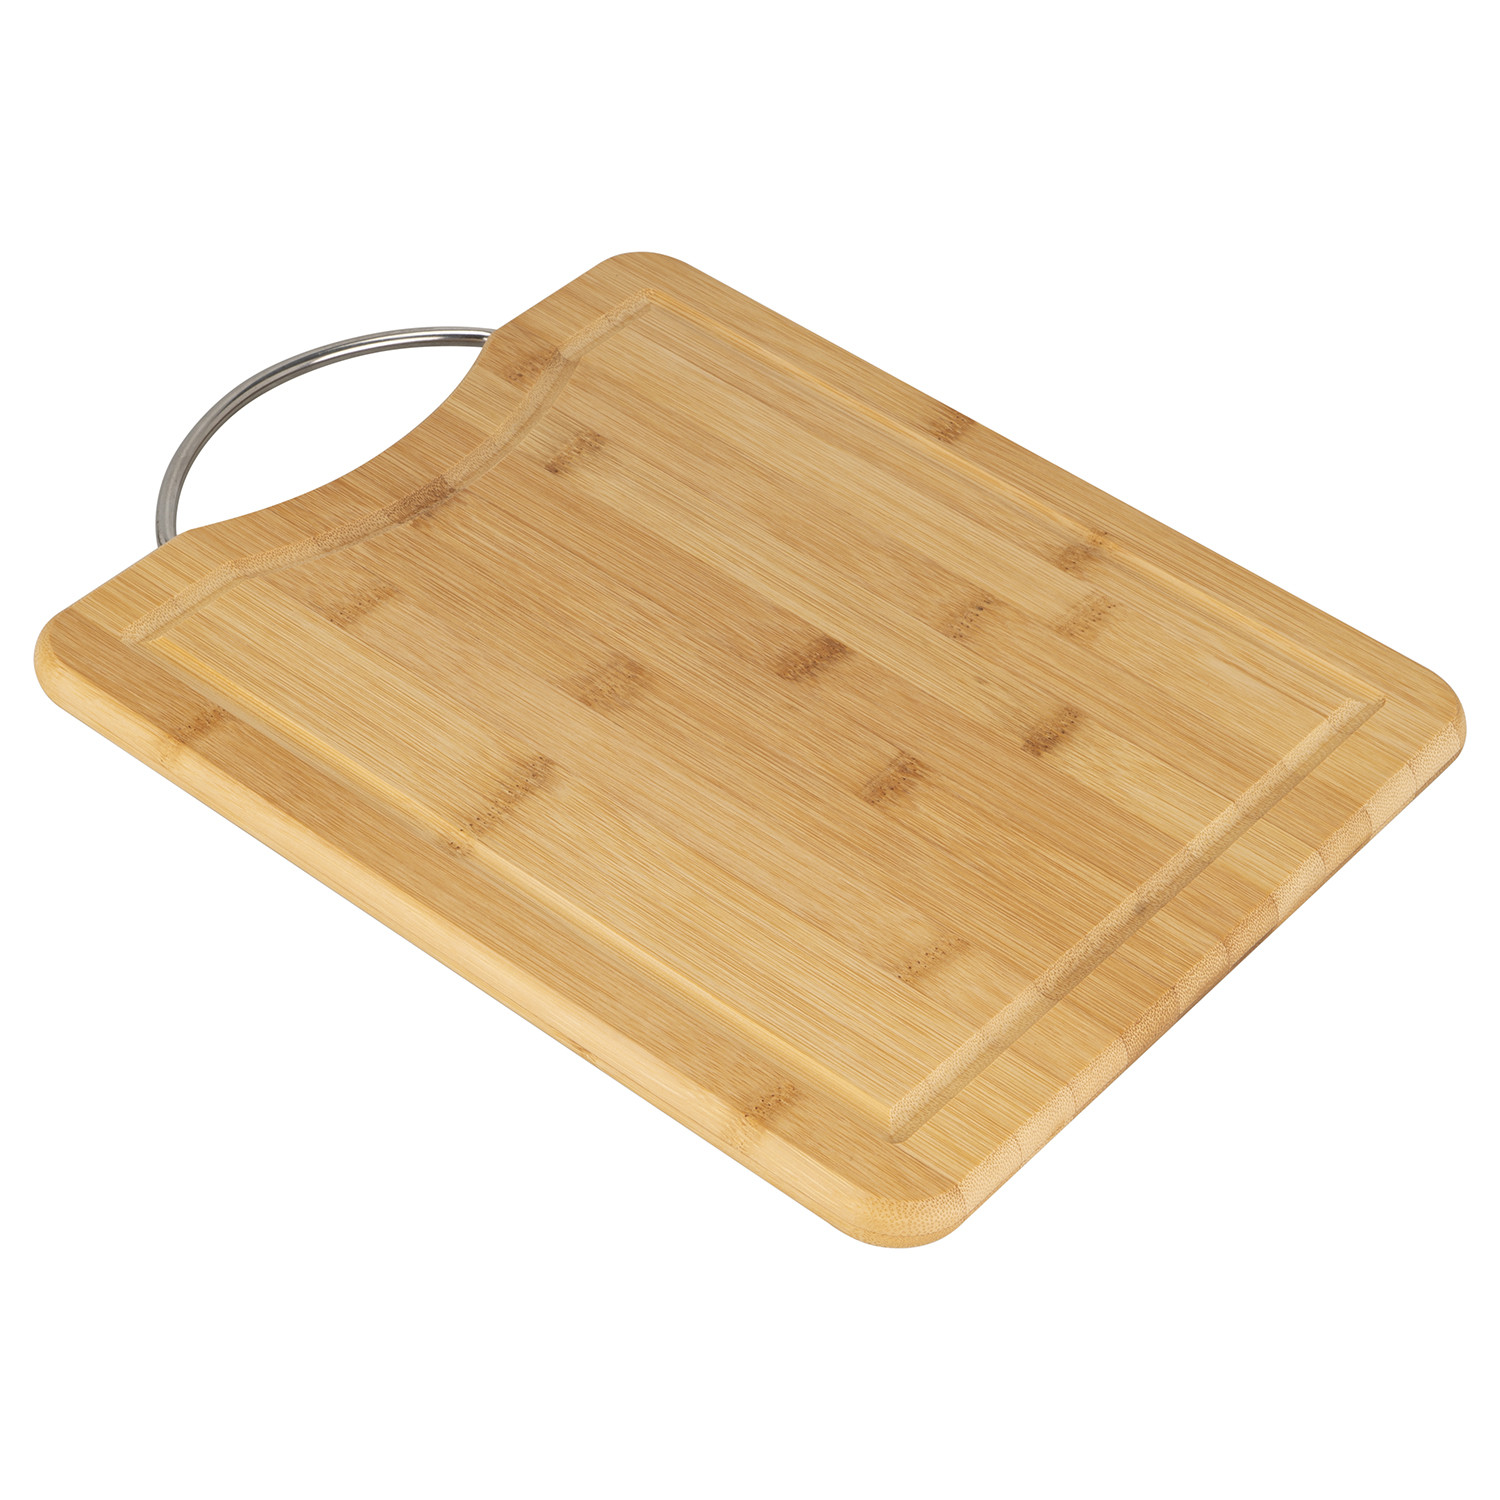 Medium Bamboo Chopping Board with Wire Handle Image 2